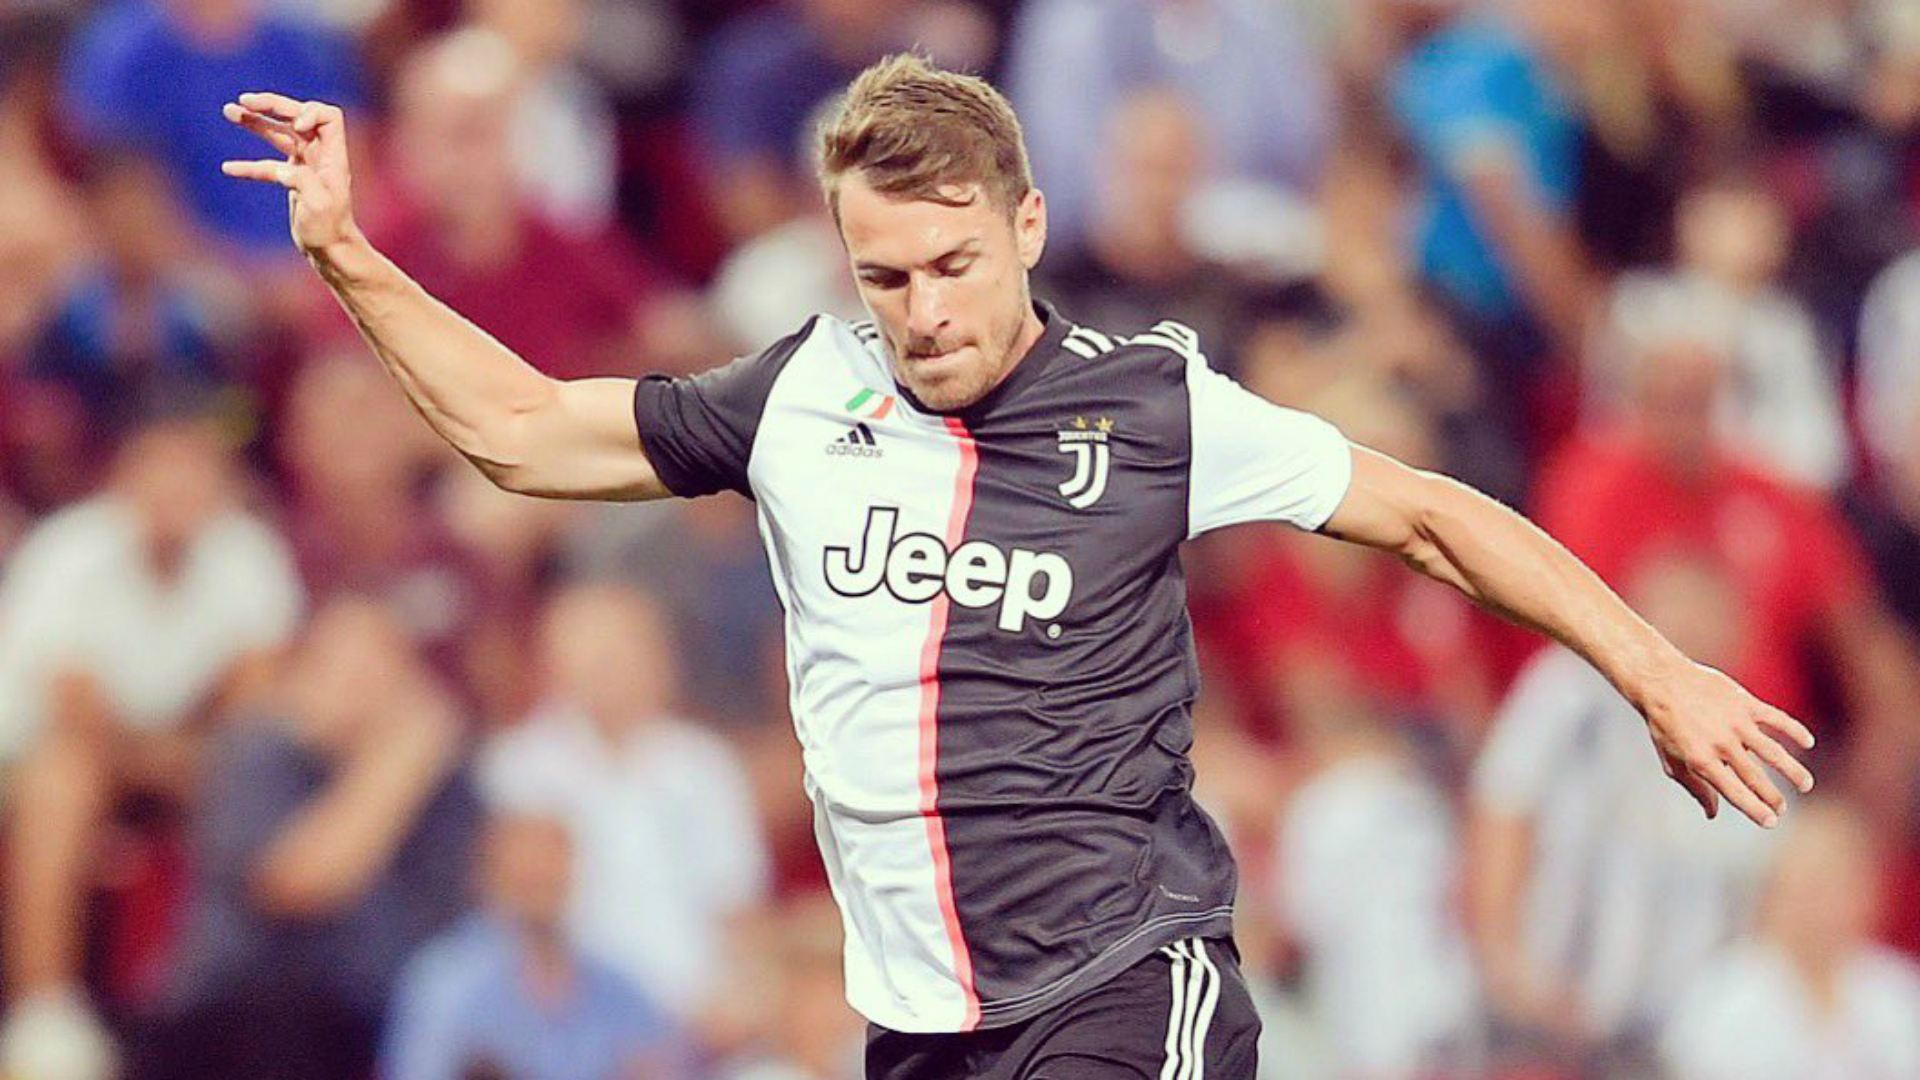 Juventus midfielder Aaron Ramsey made his first appearance in Saturday's friendly win over Triestina.